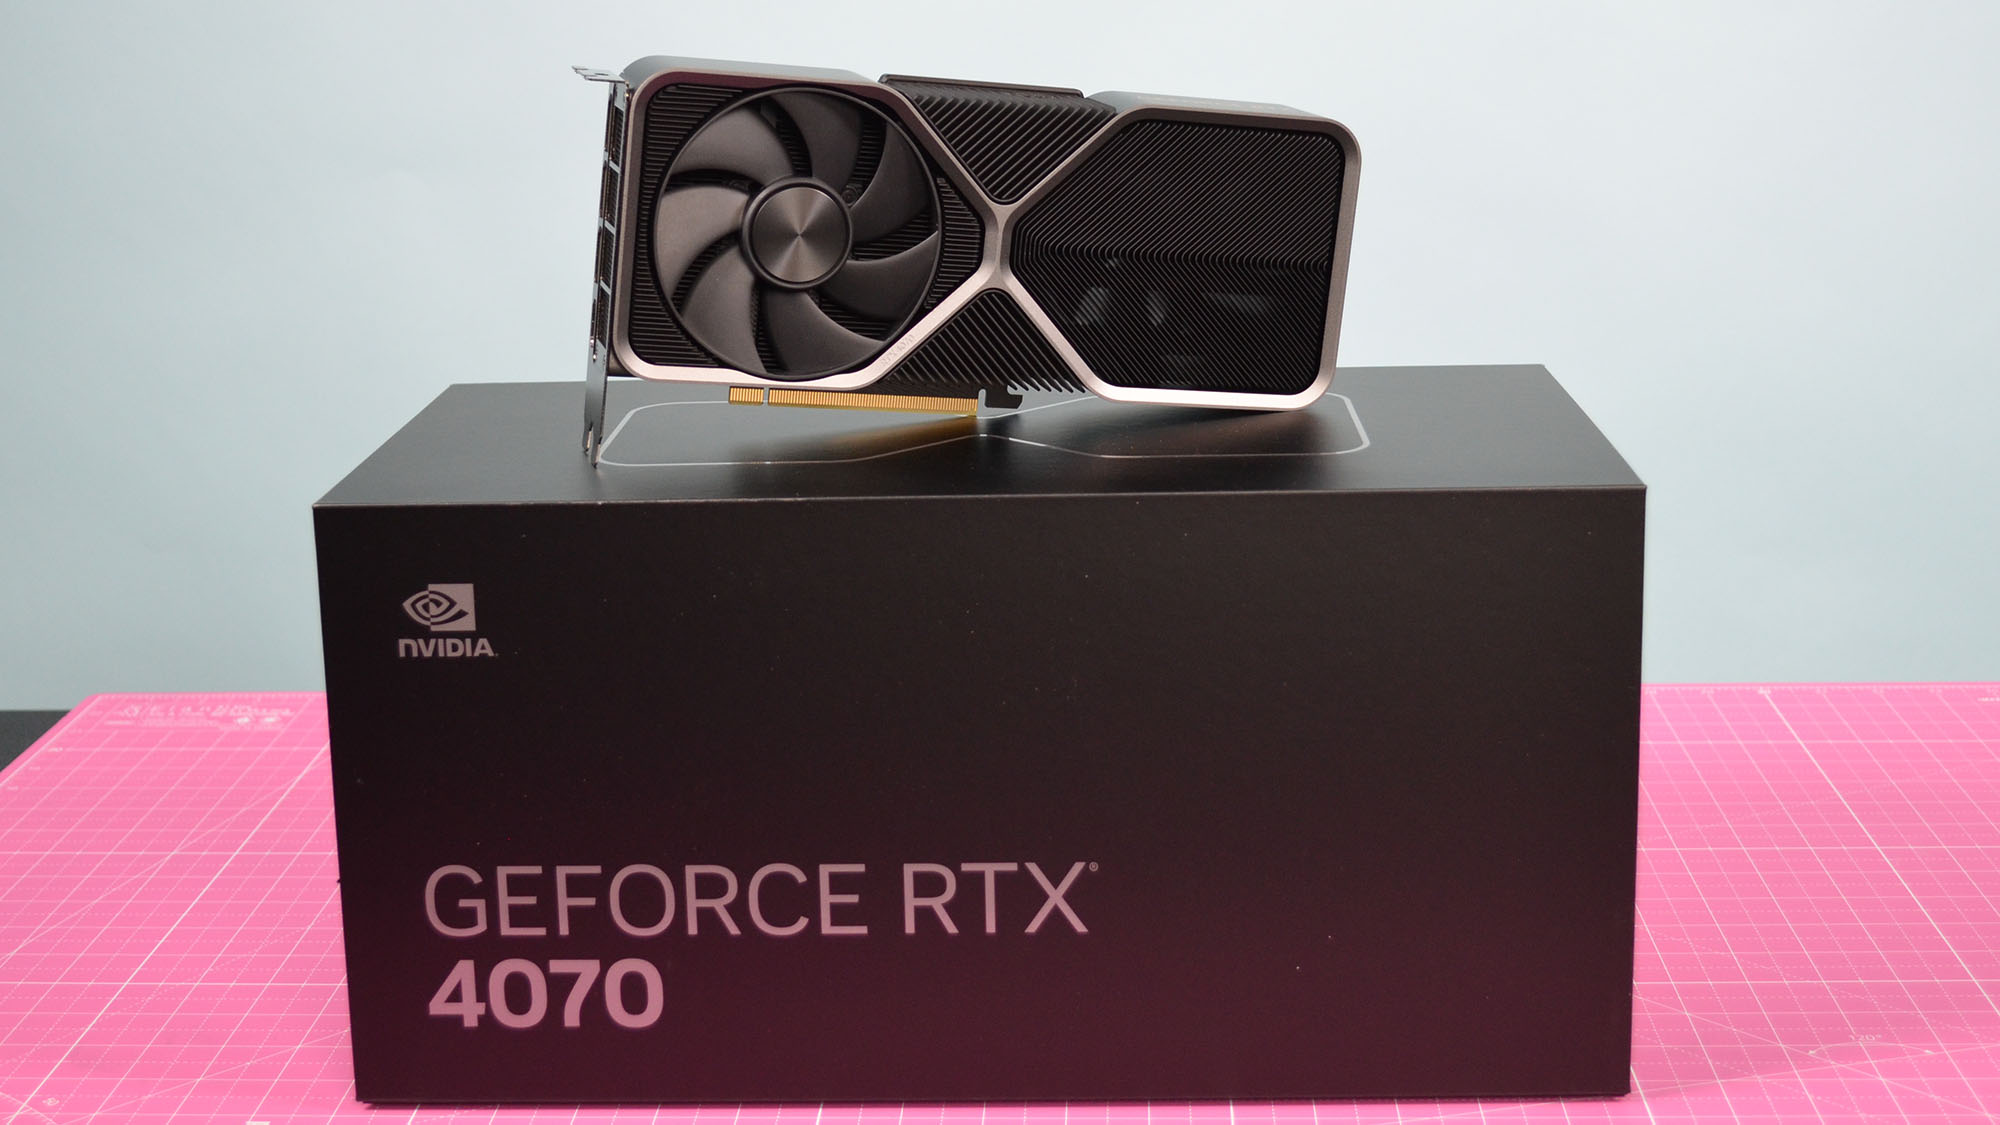 The Nvidia GeForce RTX 4070 graphics card standing on top of its retail packaging